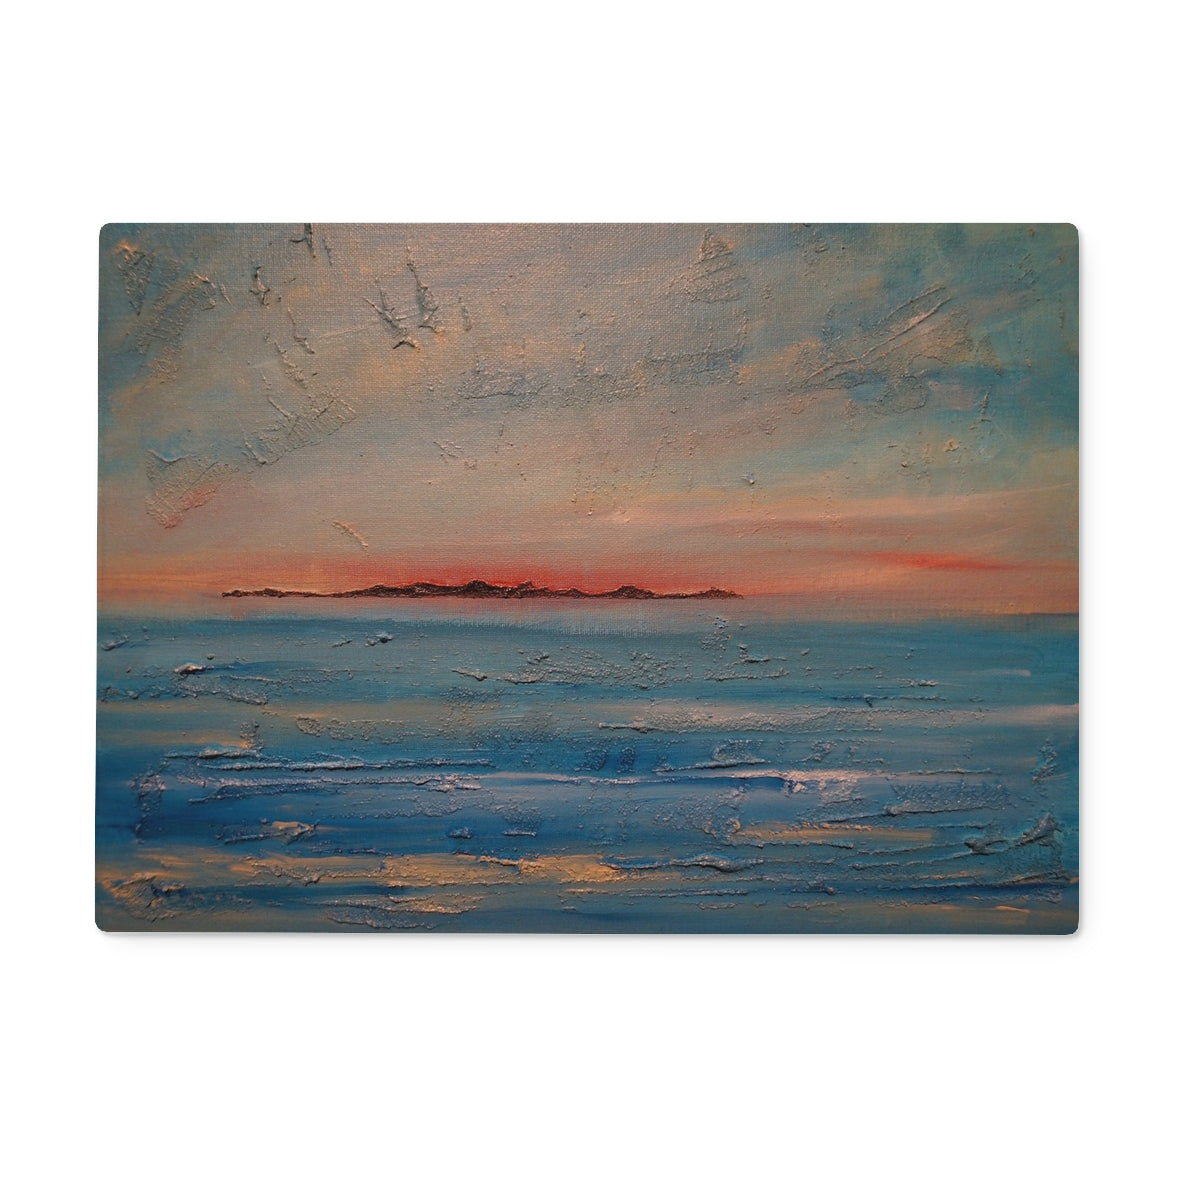 Gigha Sunset Art Gifts Glass Chopping Board-Glass Chopping Boards-Hebridean Islands Art Gallery-15"x11" Rectangular-Paintings, Prints, Homeware, Art Gifts From Scotland By Scottish Artist Kevin Hunter